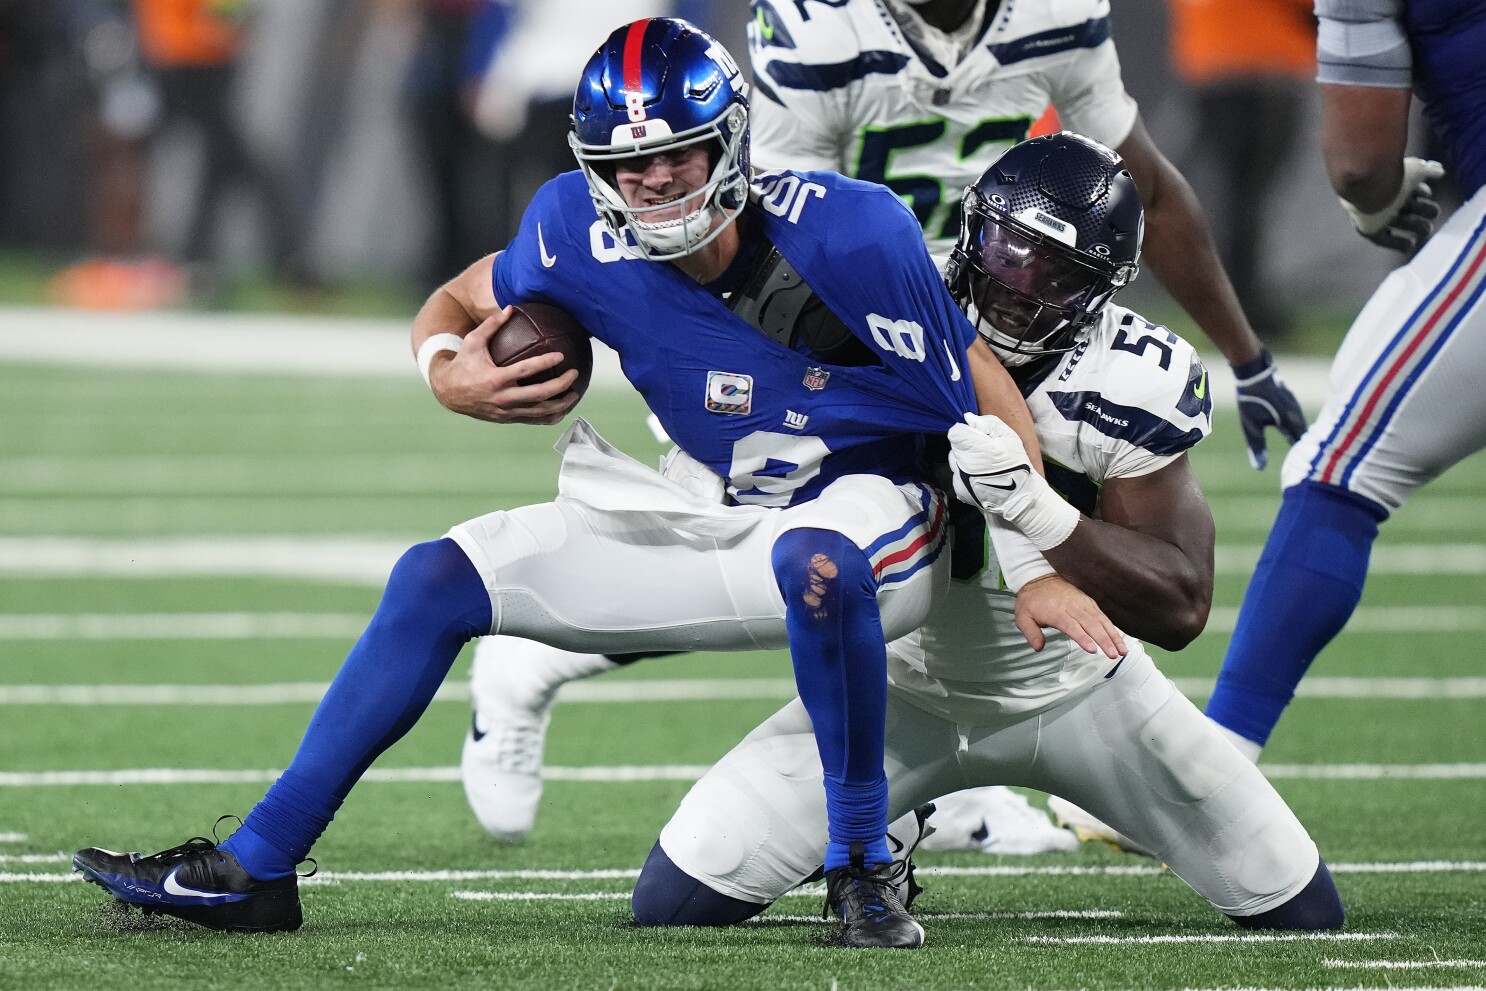 What The Seahawks Said - 2023 Week 4: Seahawks at Giants